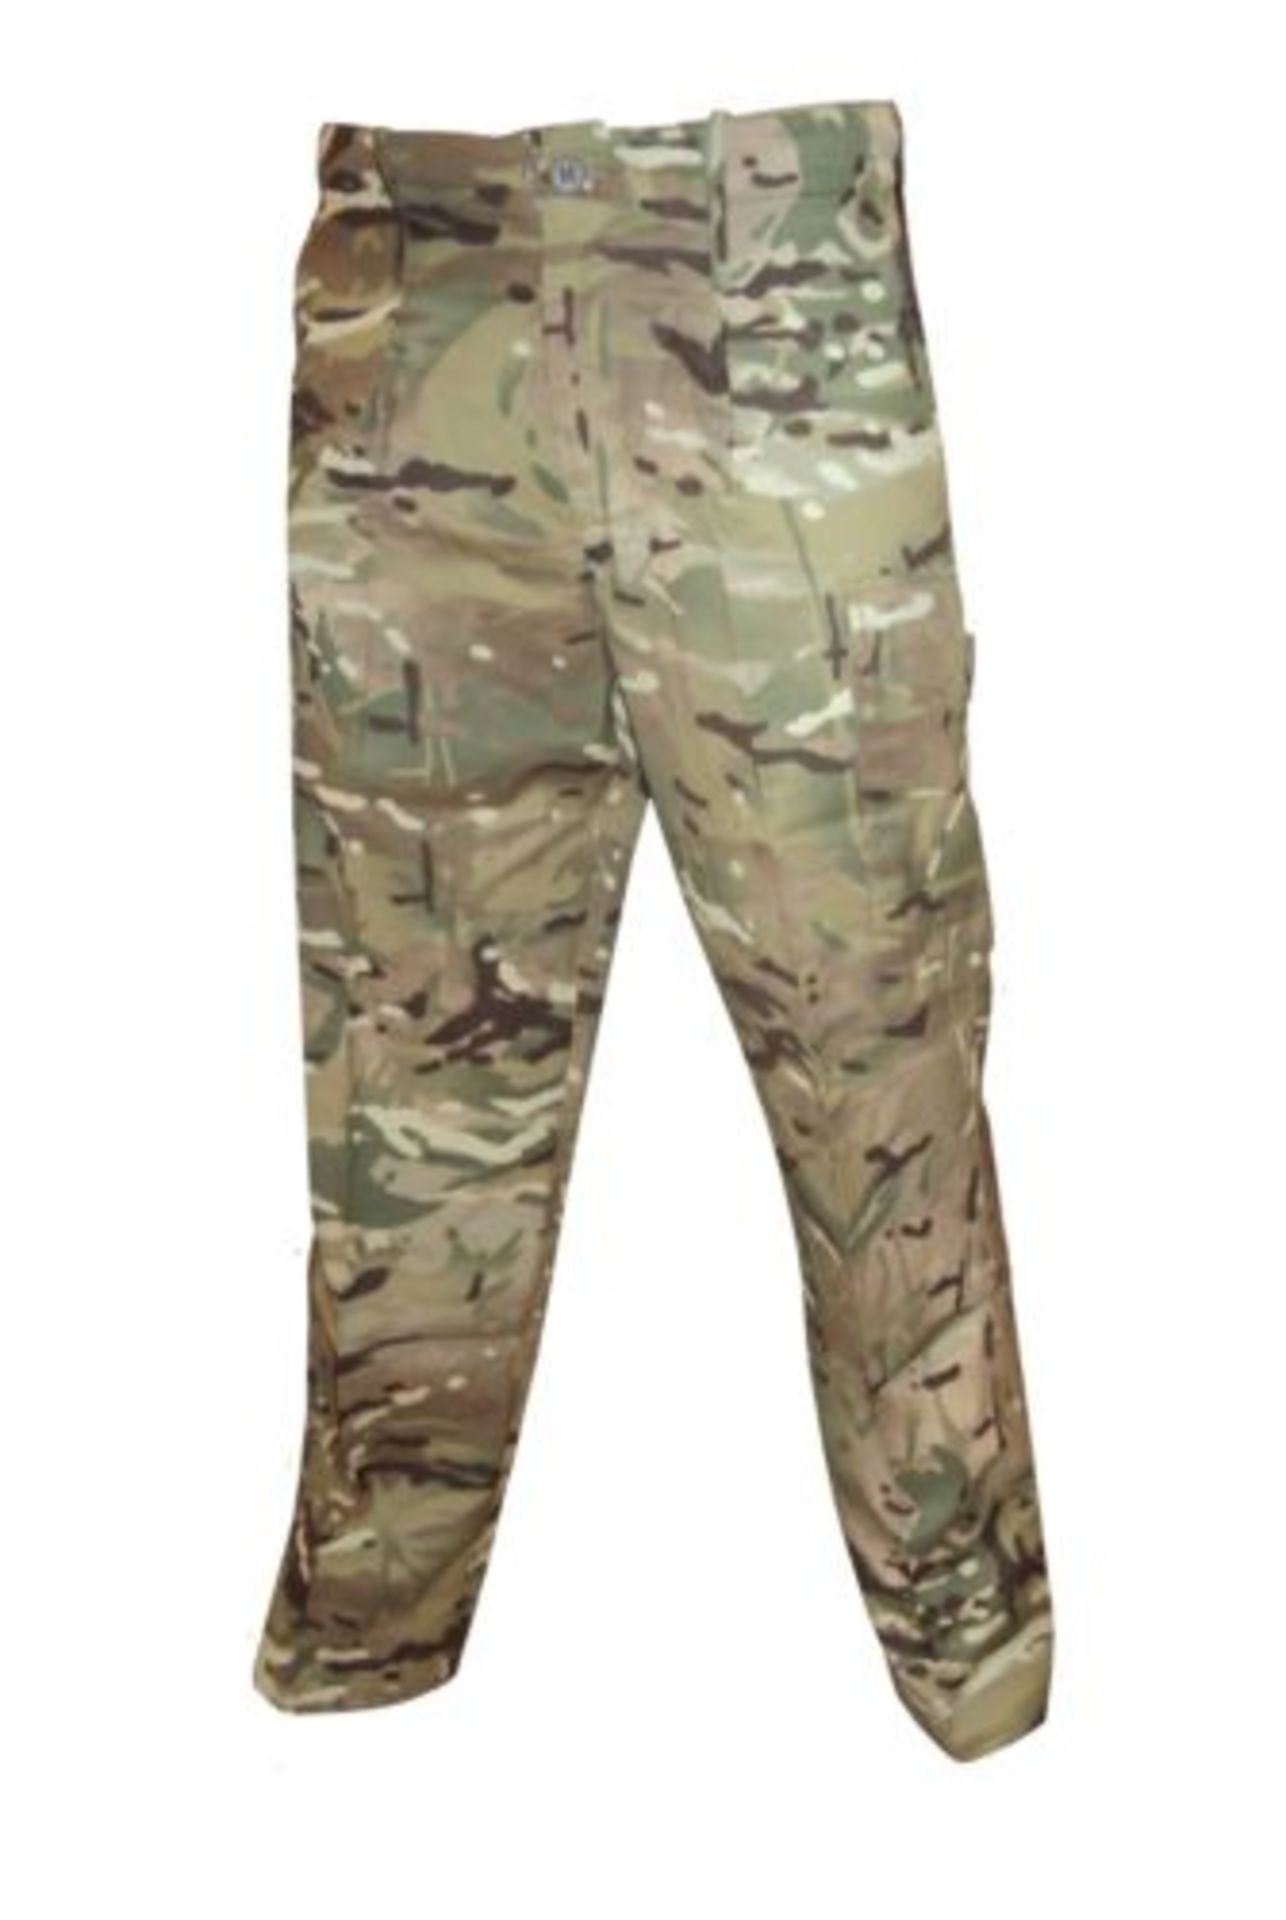 PACK OF 10 - MTP TROUSERS - GRADE 1 - MIXED SIZES